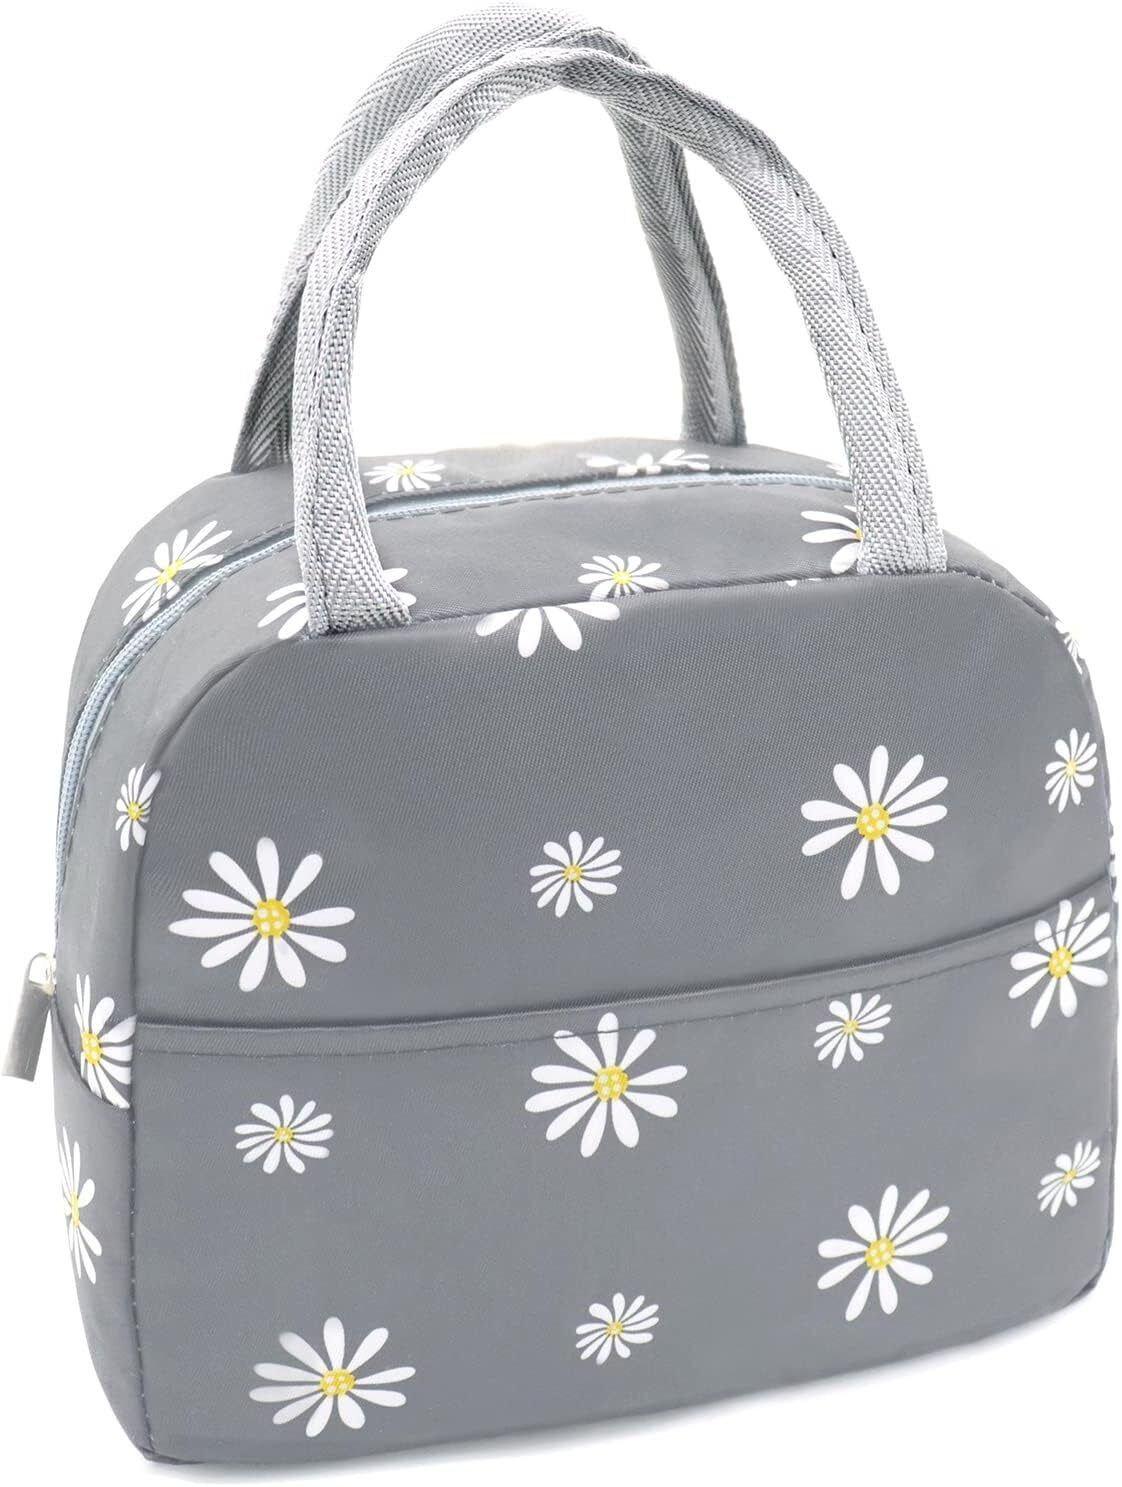 Sonuimy Insulated Lunch Bag Women Girls, Reusable Cute Grey with White Daisy 